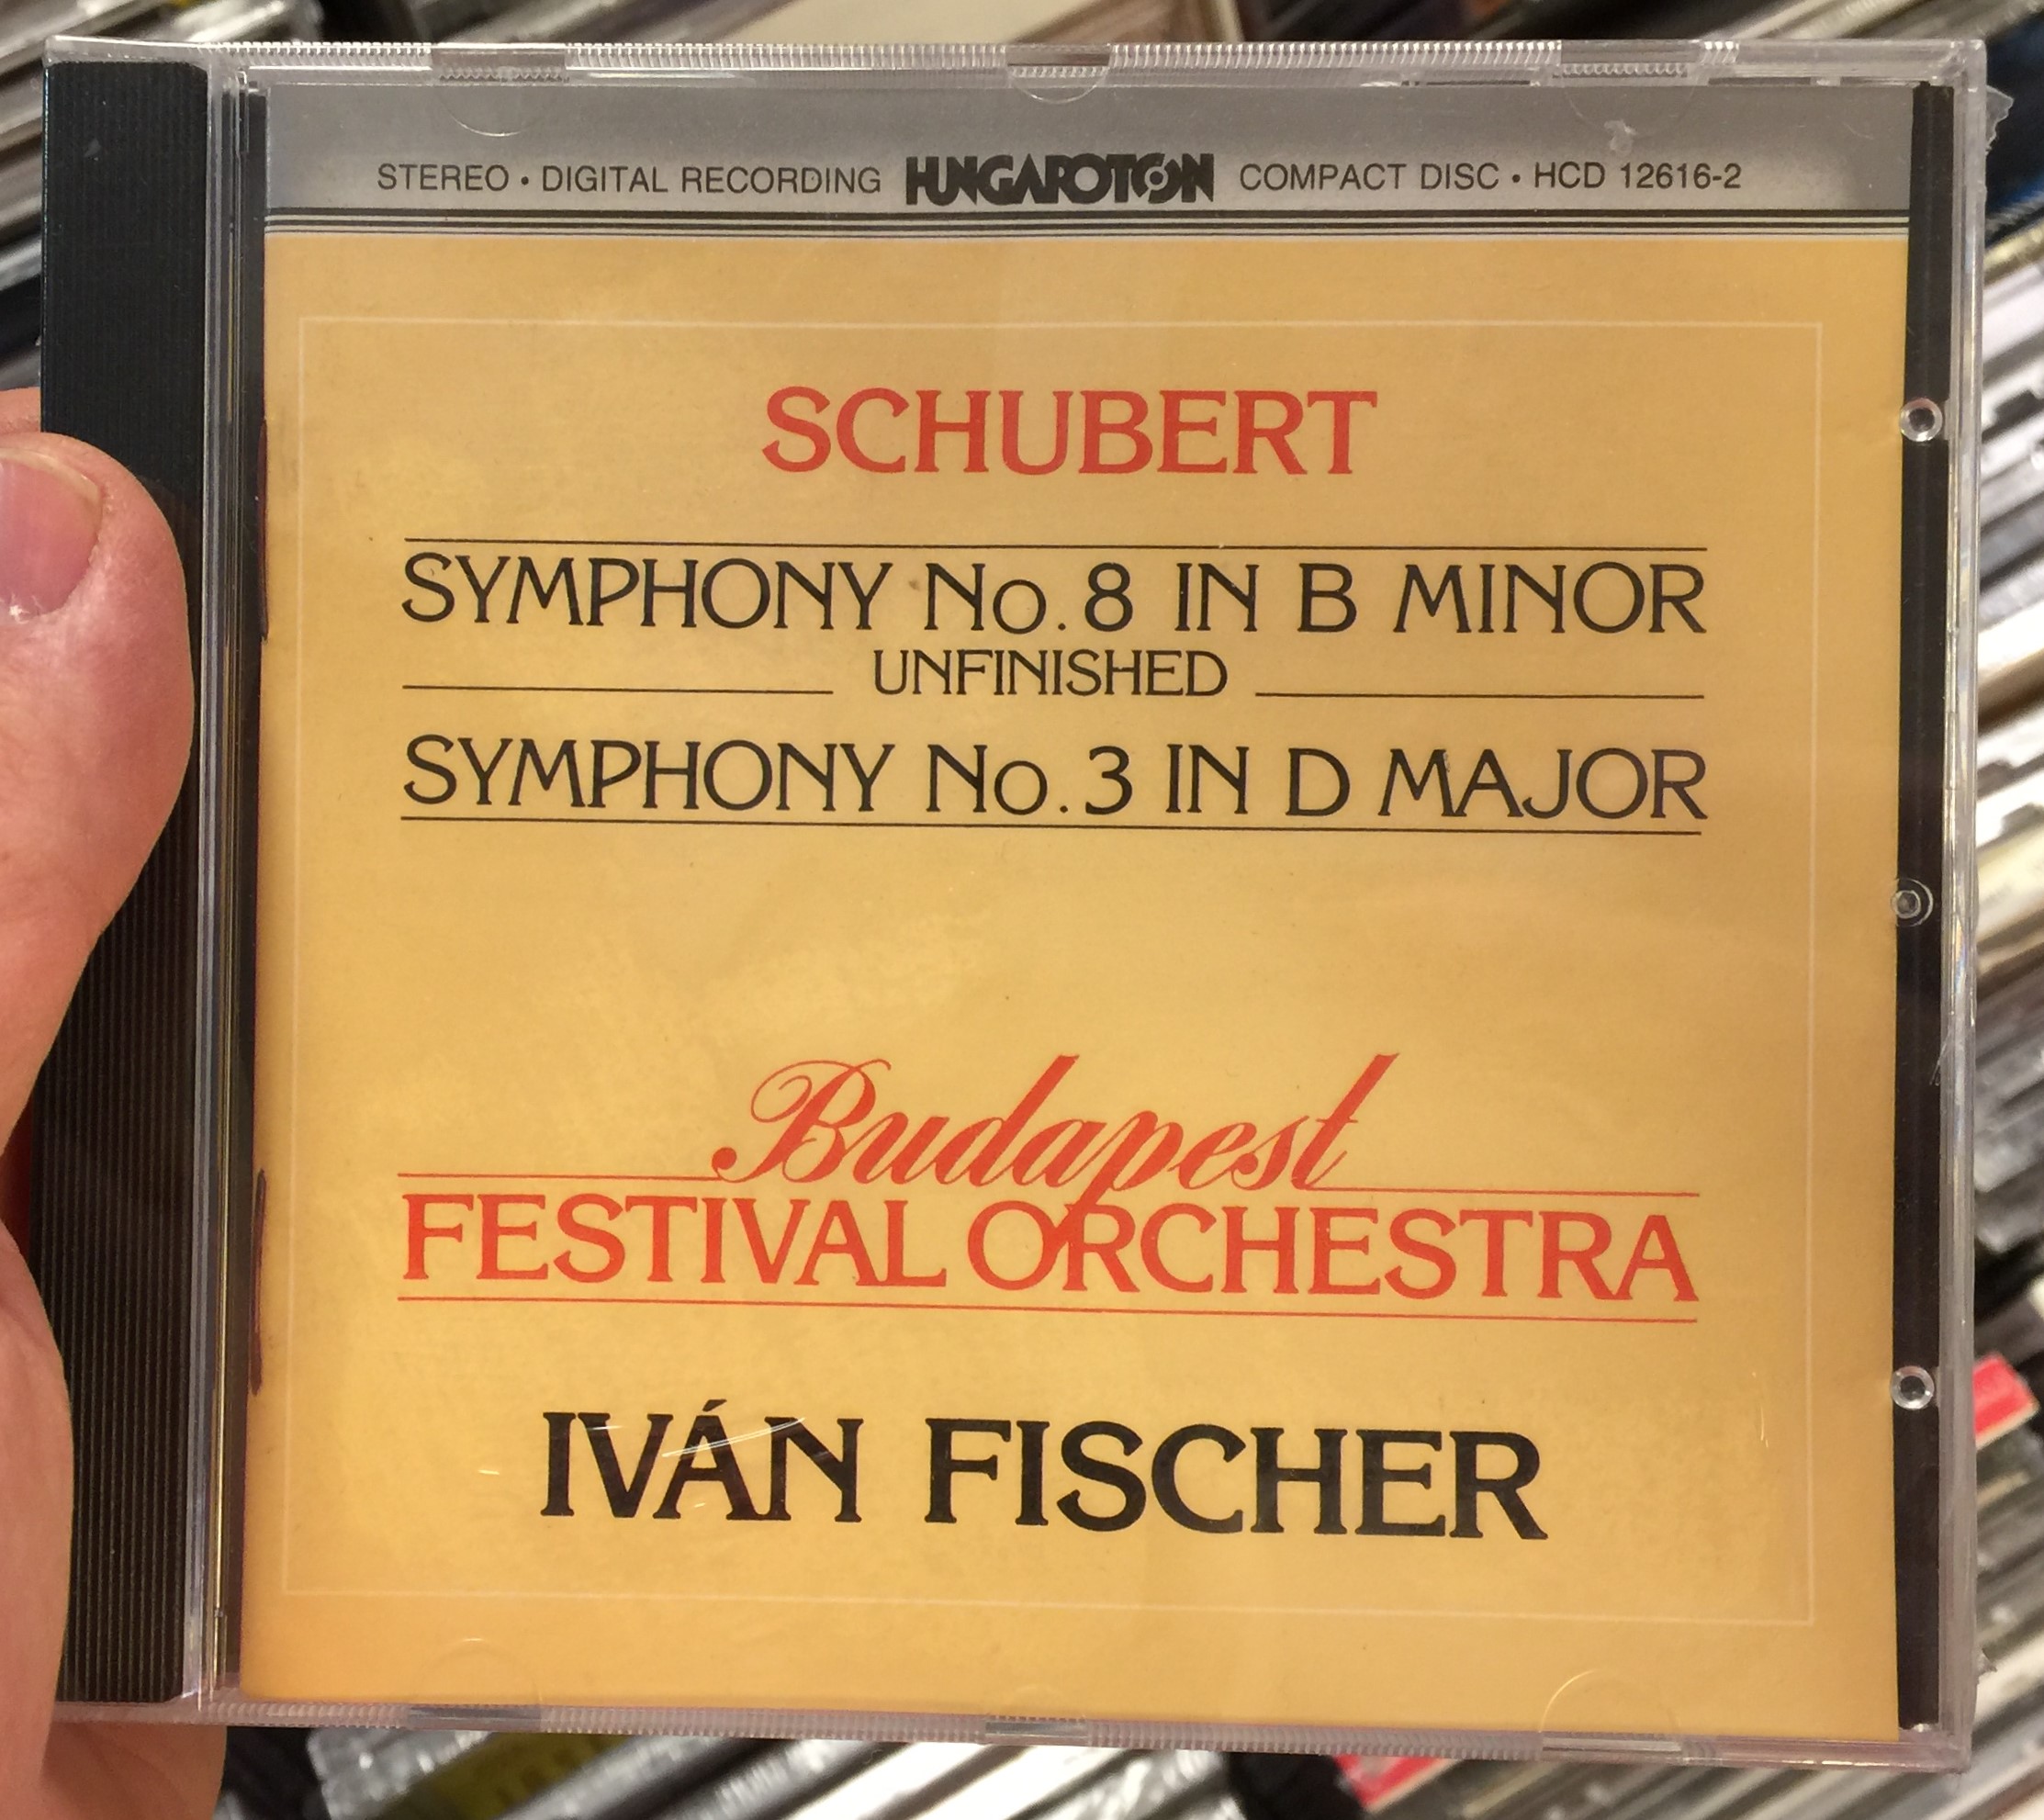 schubert-symphony-no.-8-in-b-minor-unfinished-symphony-no.-3-in-d-major-budapest-festival-orchestra-iv-n-fischer-hungaroton-audio-cd-1984-stereo-hcd-12616-2-1-.jpg